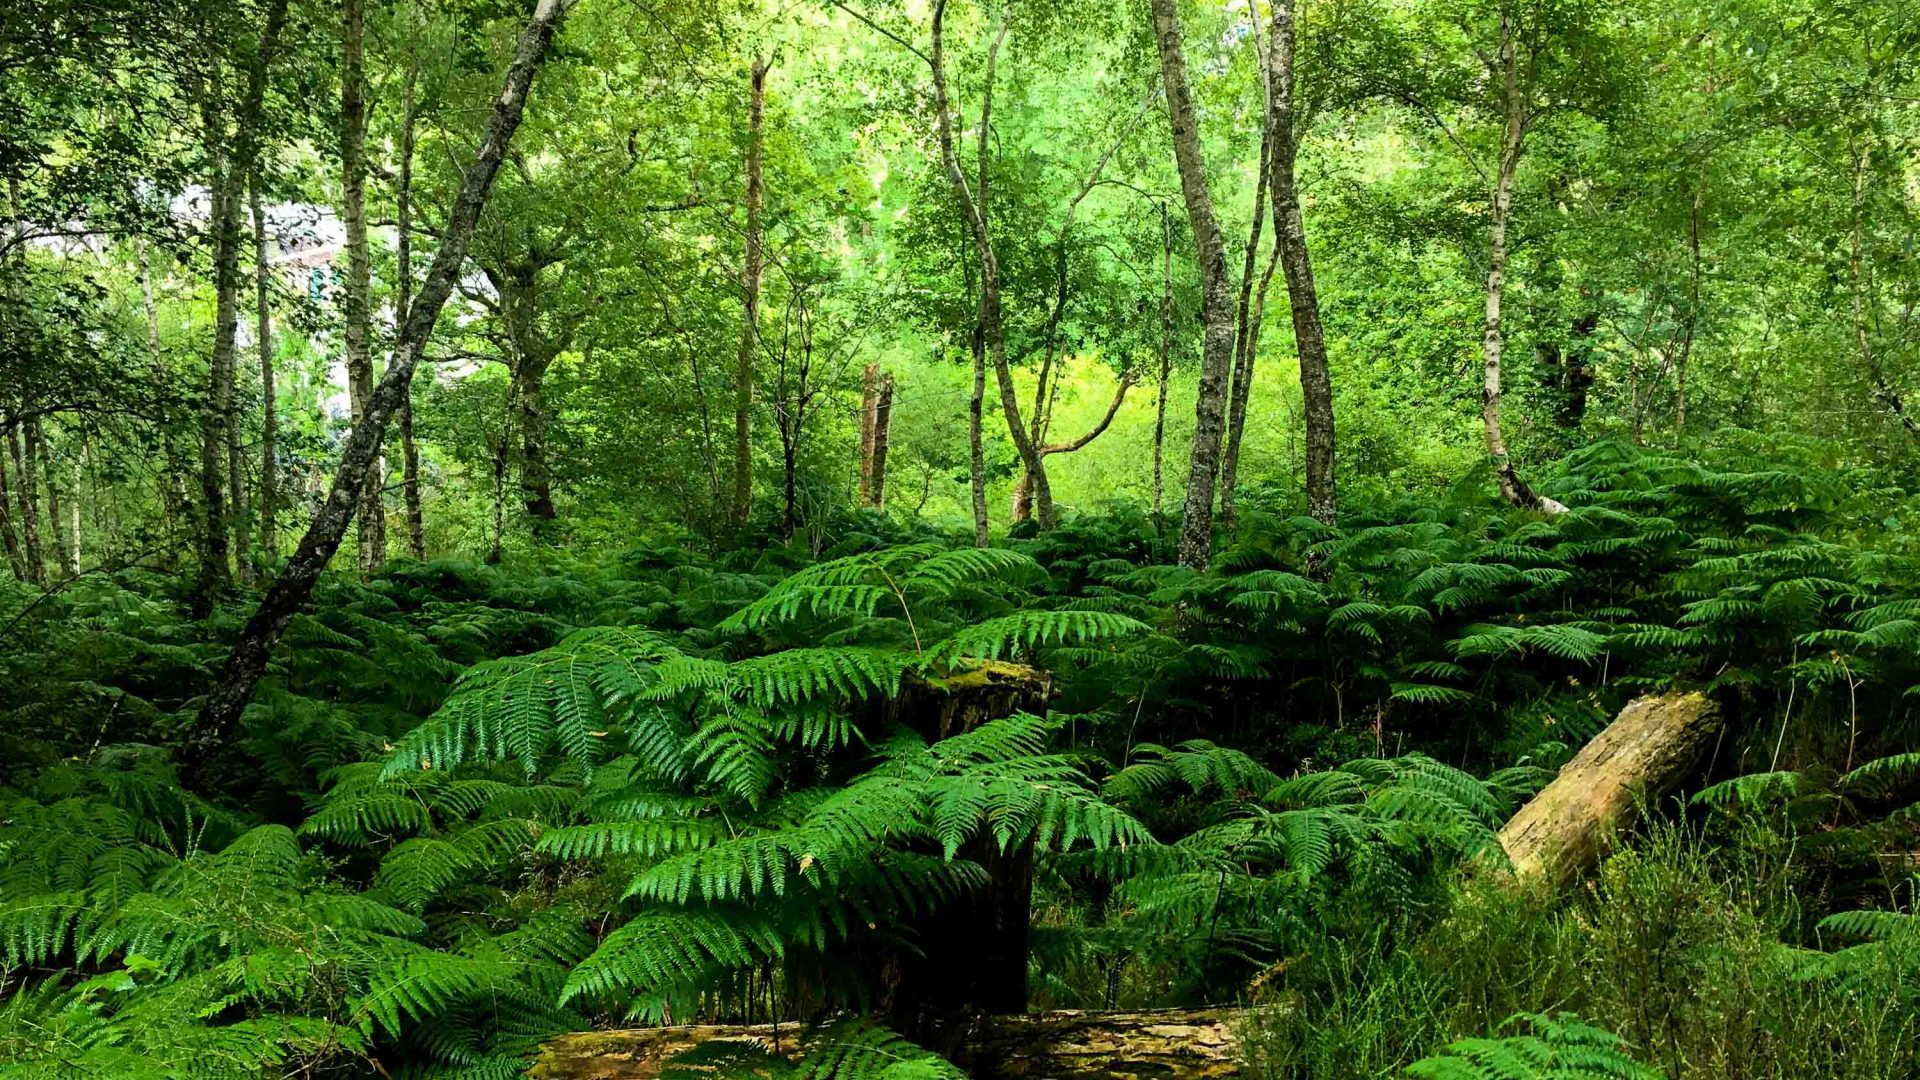 Ferns cover the forest floor.